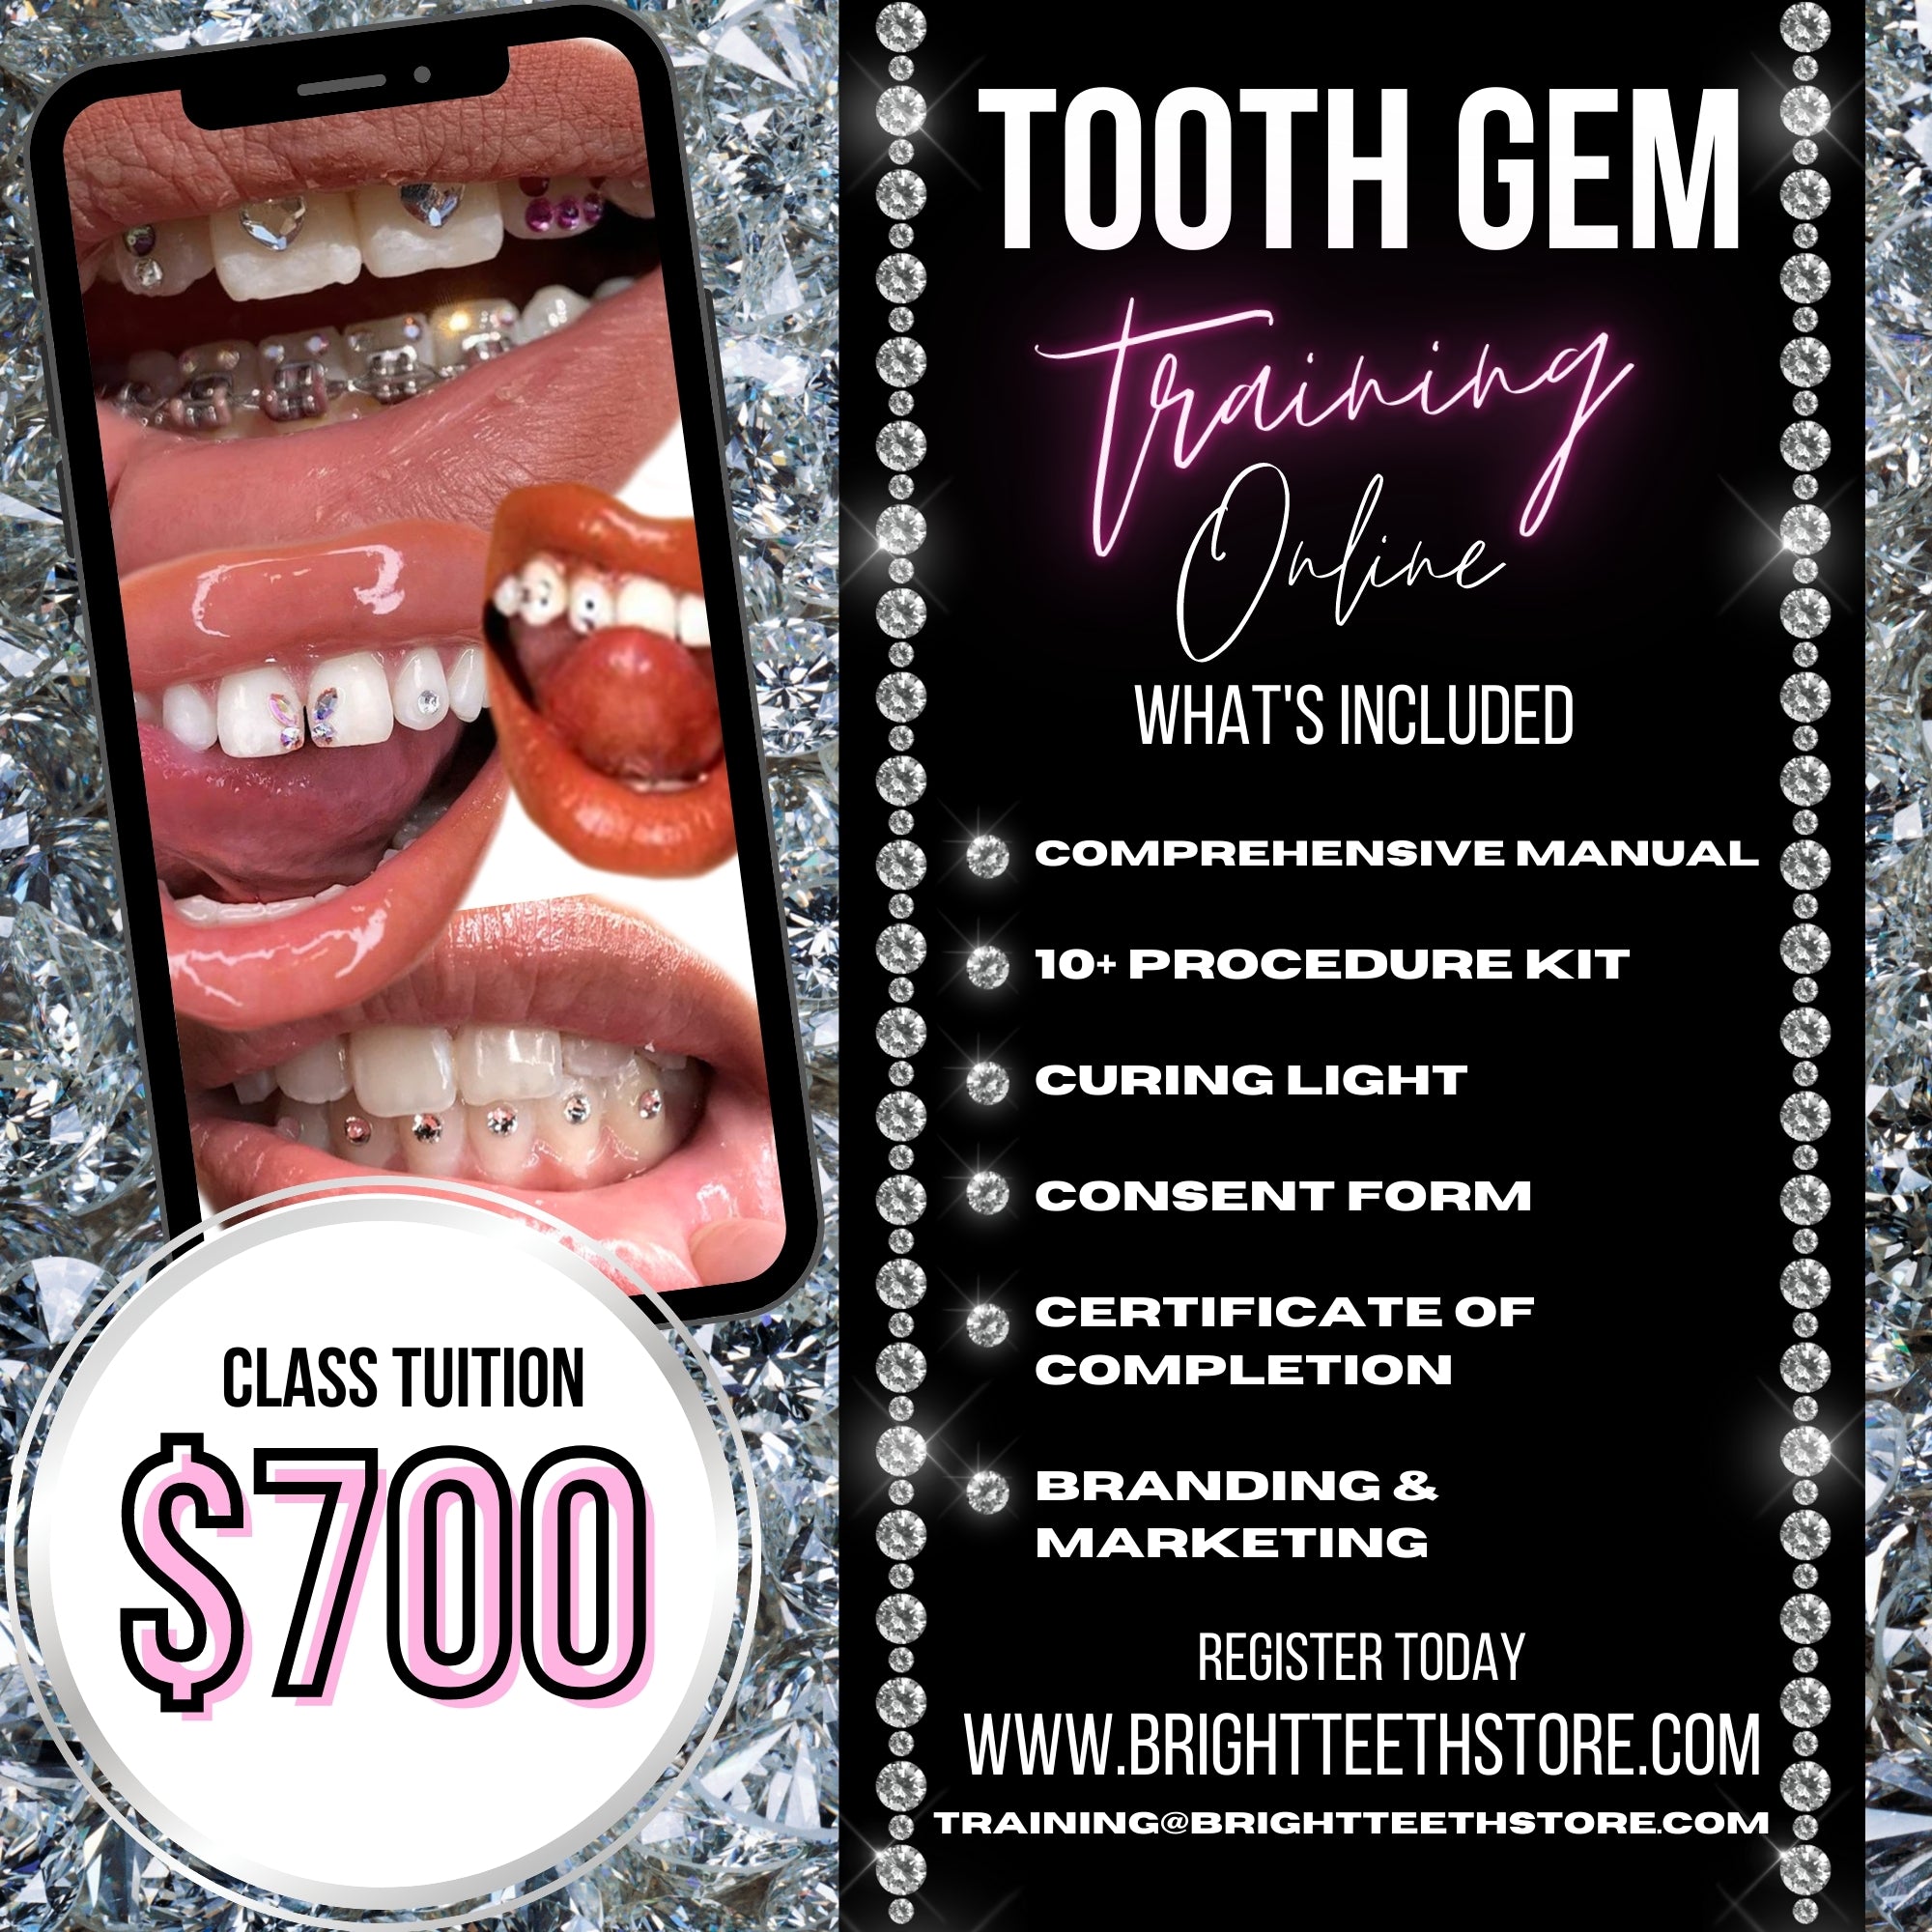 Tooth Gem Training — GBY BEAUTY